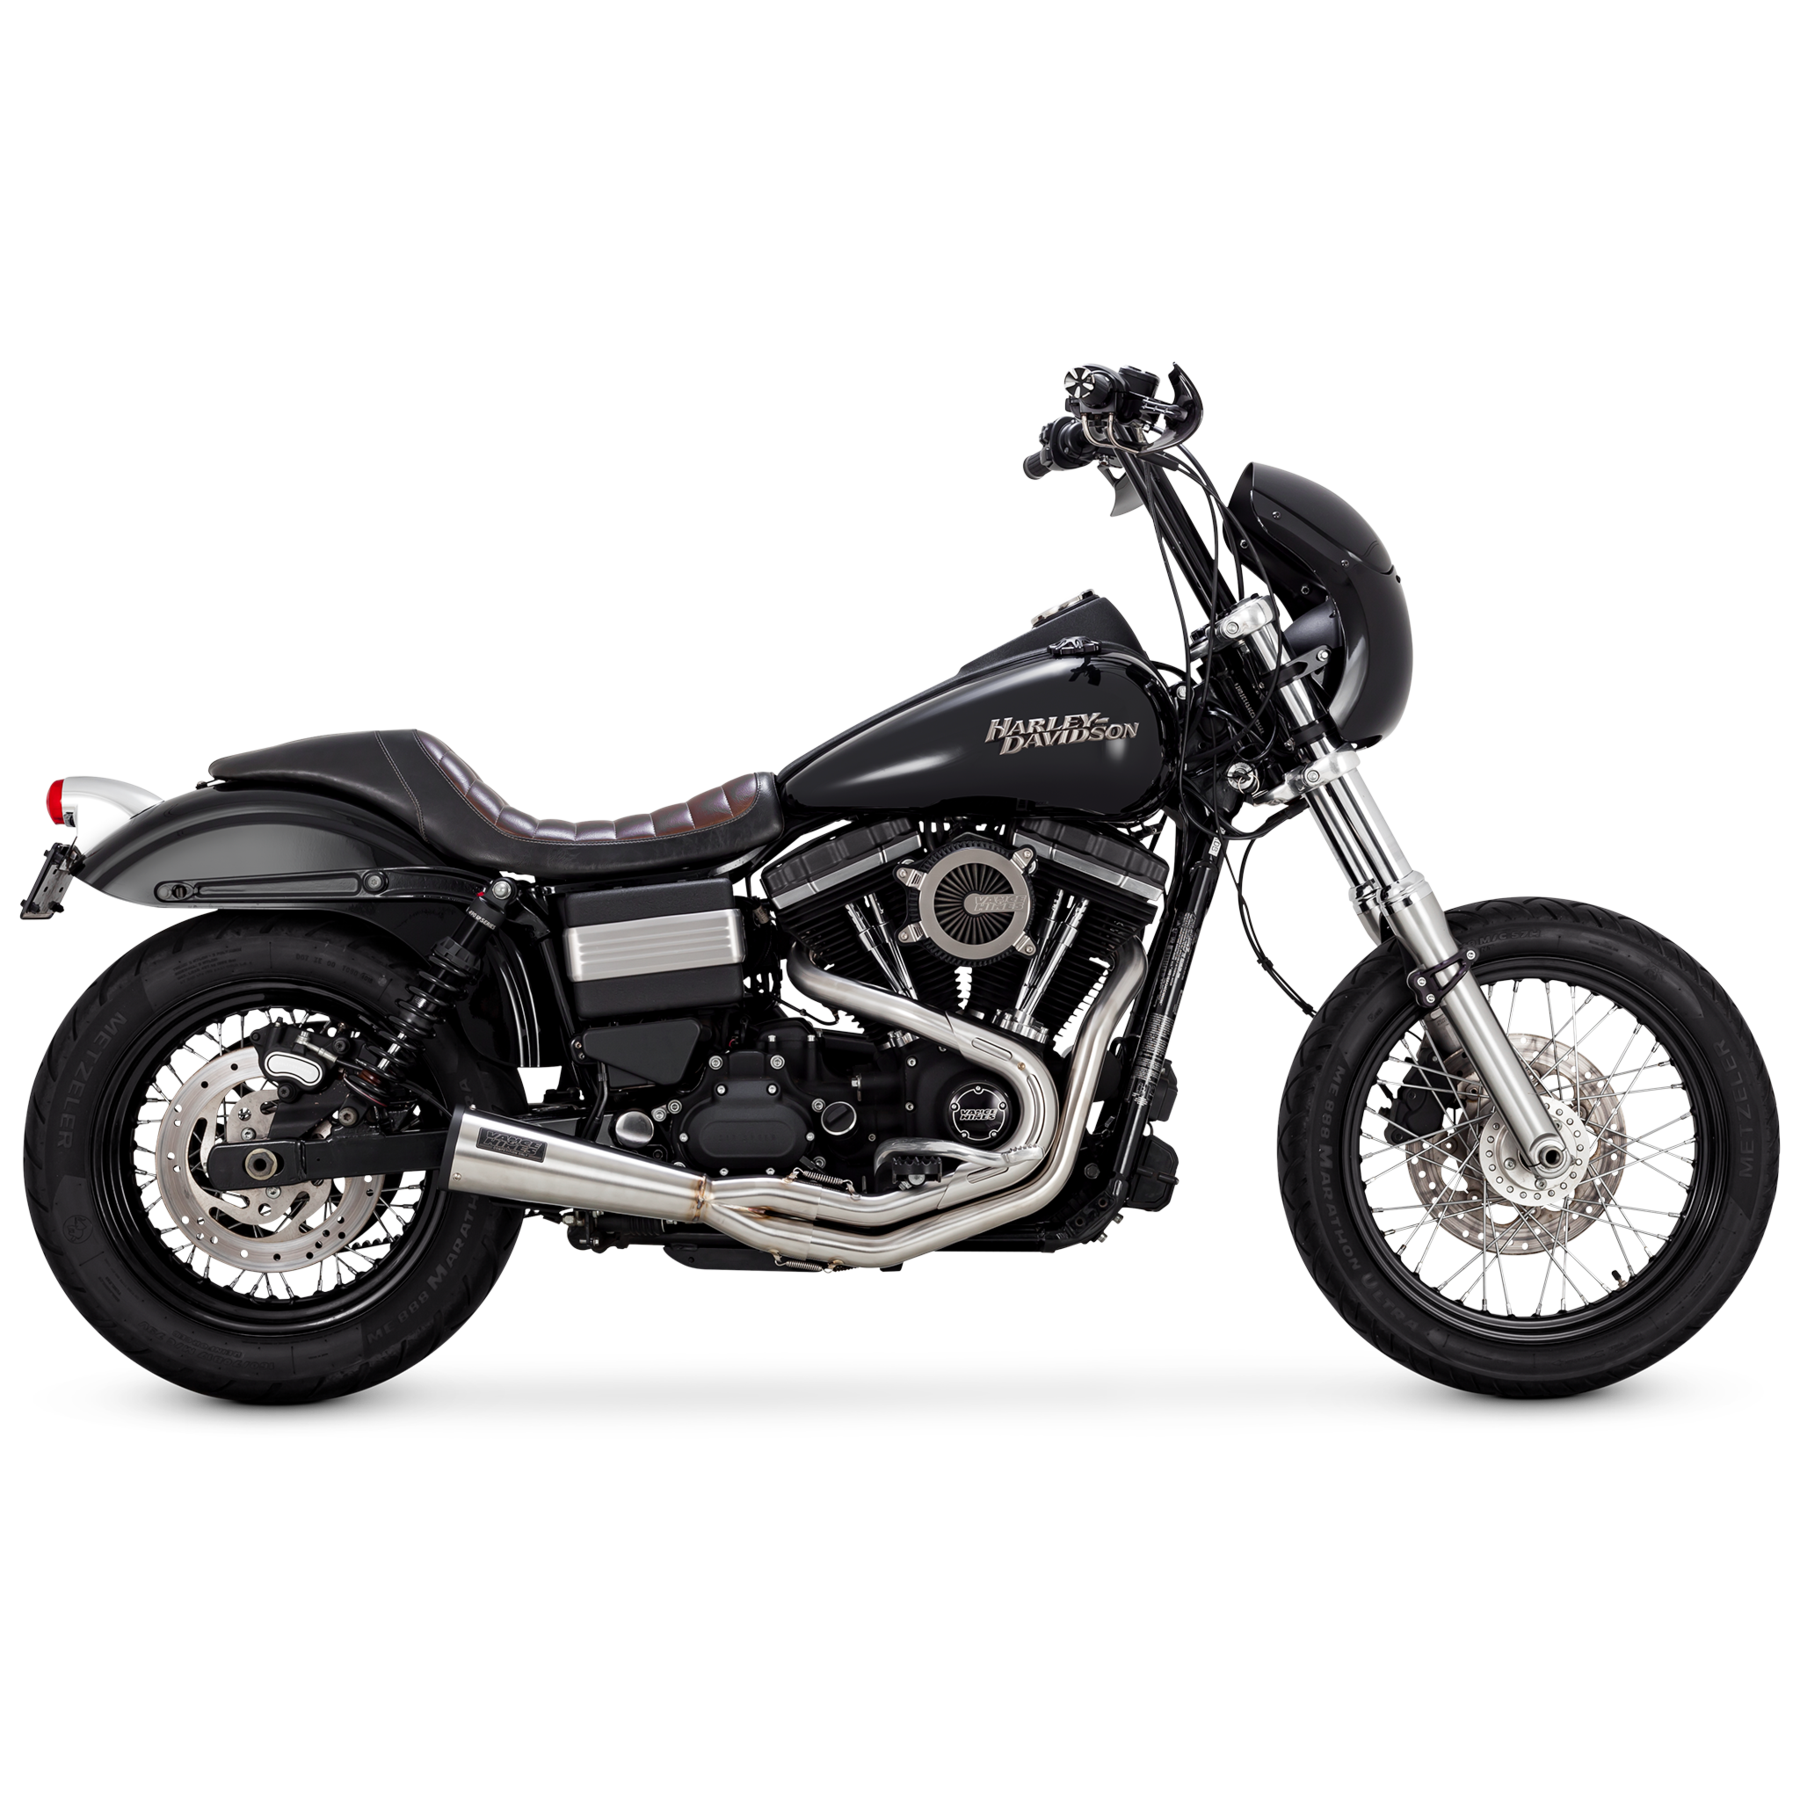 VANCE & HINES STAINLESS 2-INTO-1 UPSWEEP